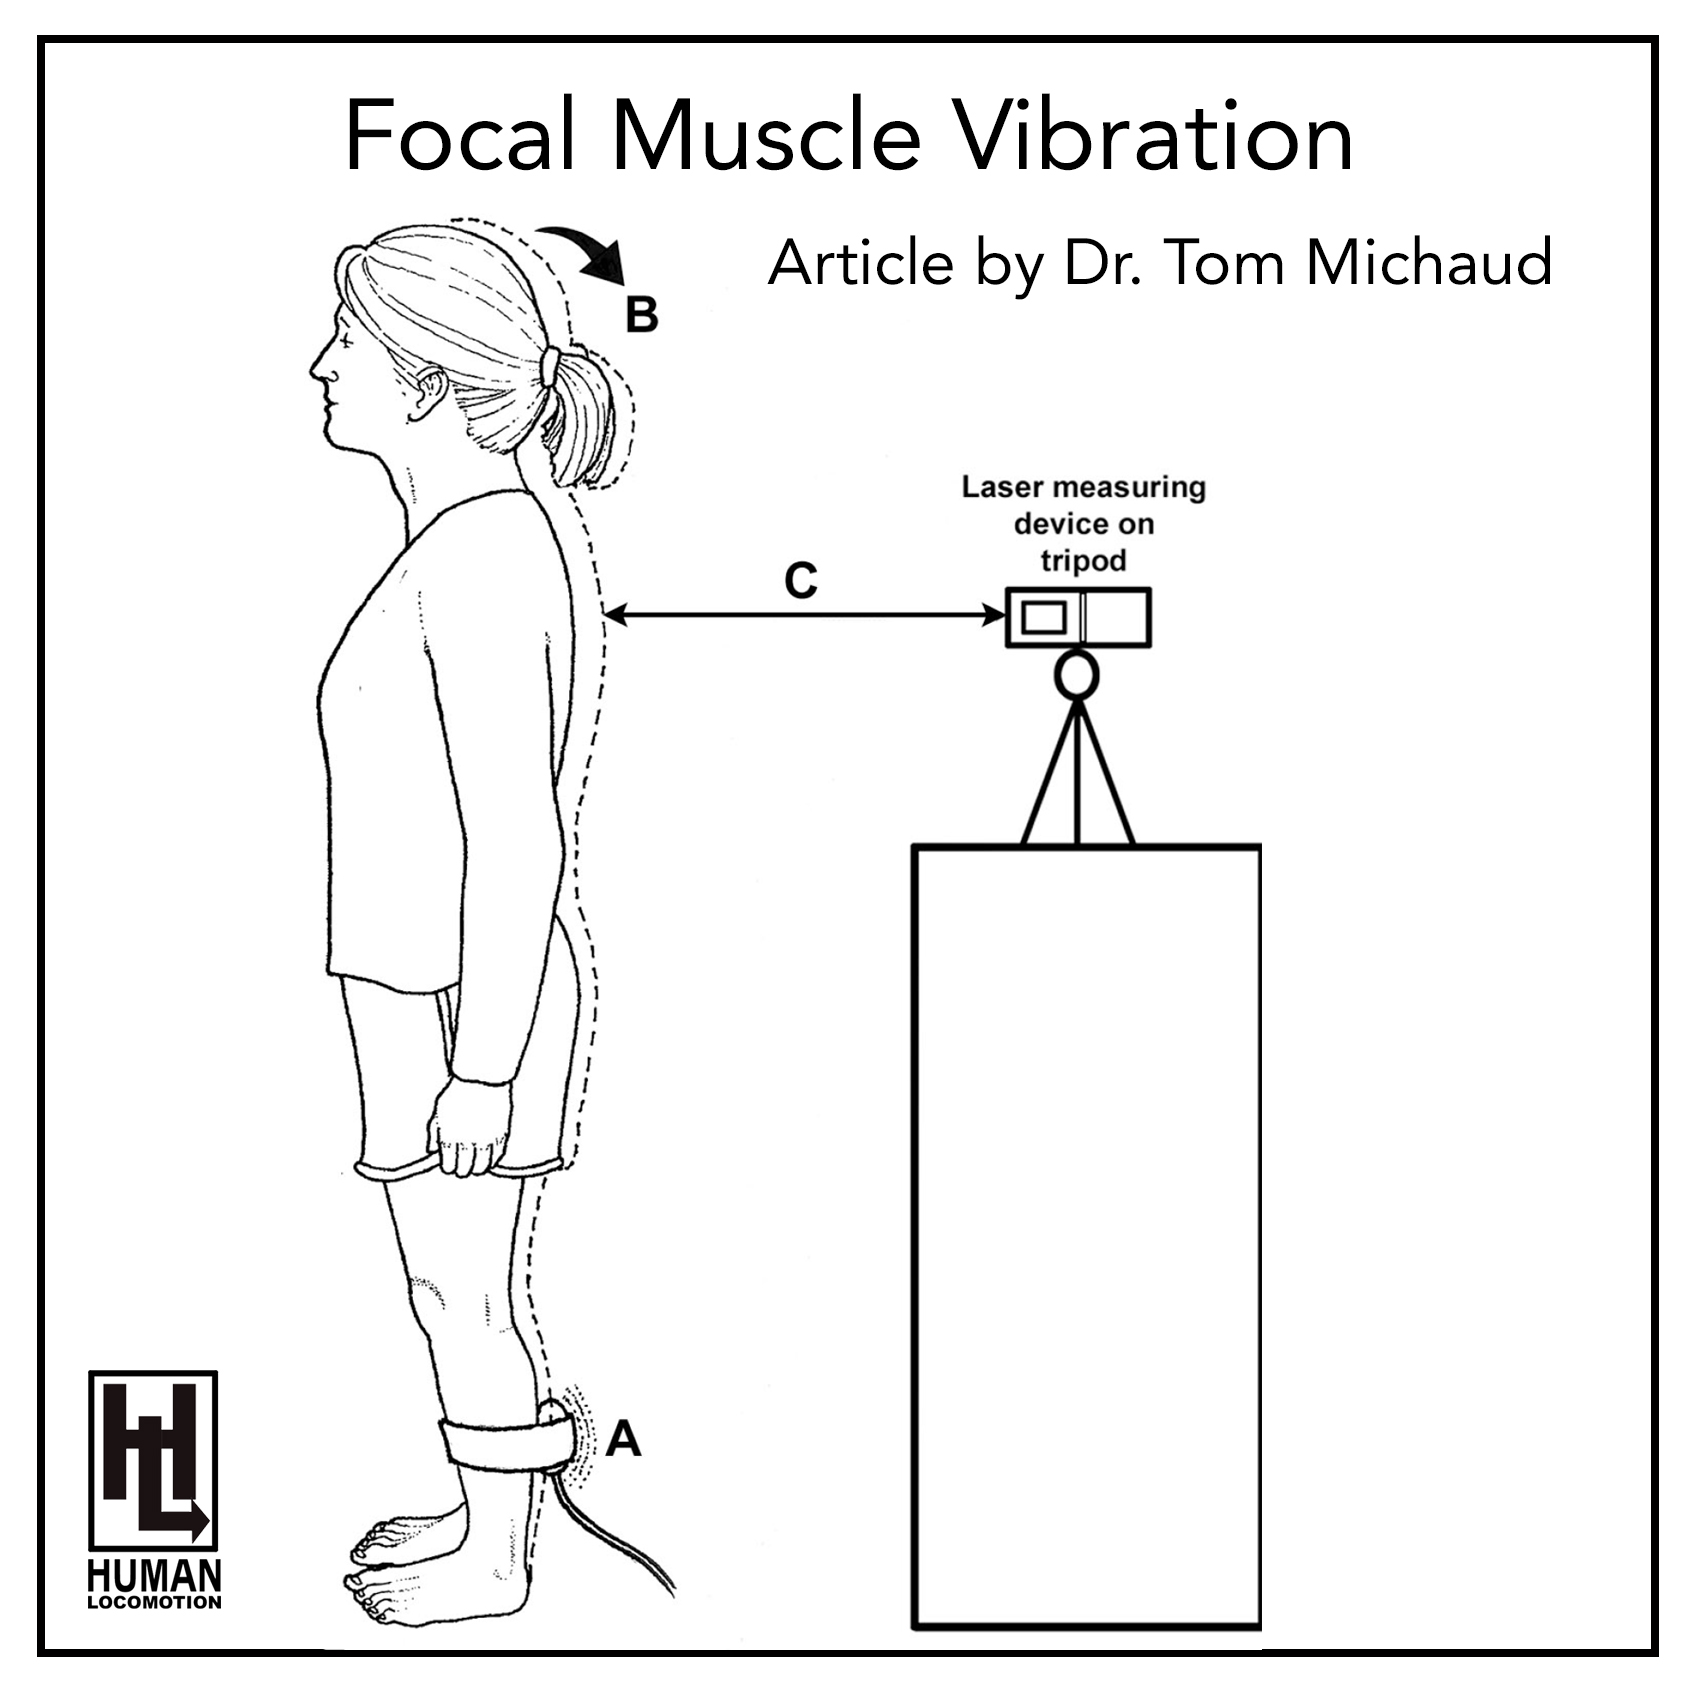 Focal Muscle Vibration: An Overlooked Tool for Diagnosing and Managing Low Back Pain